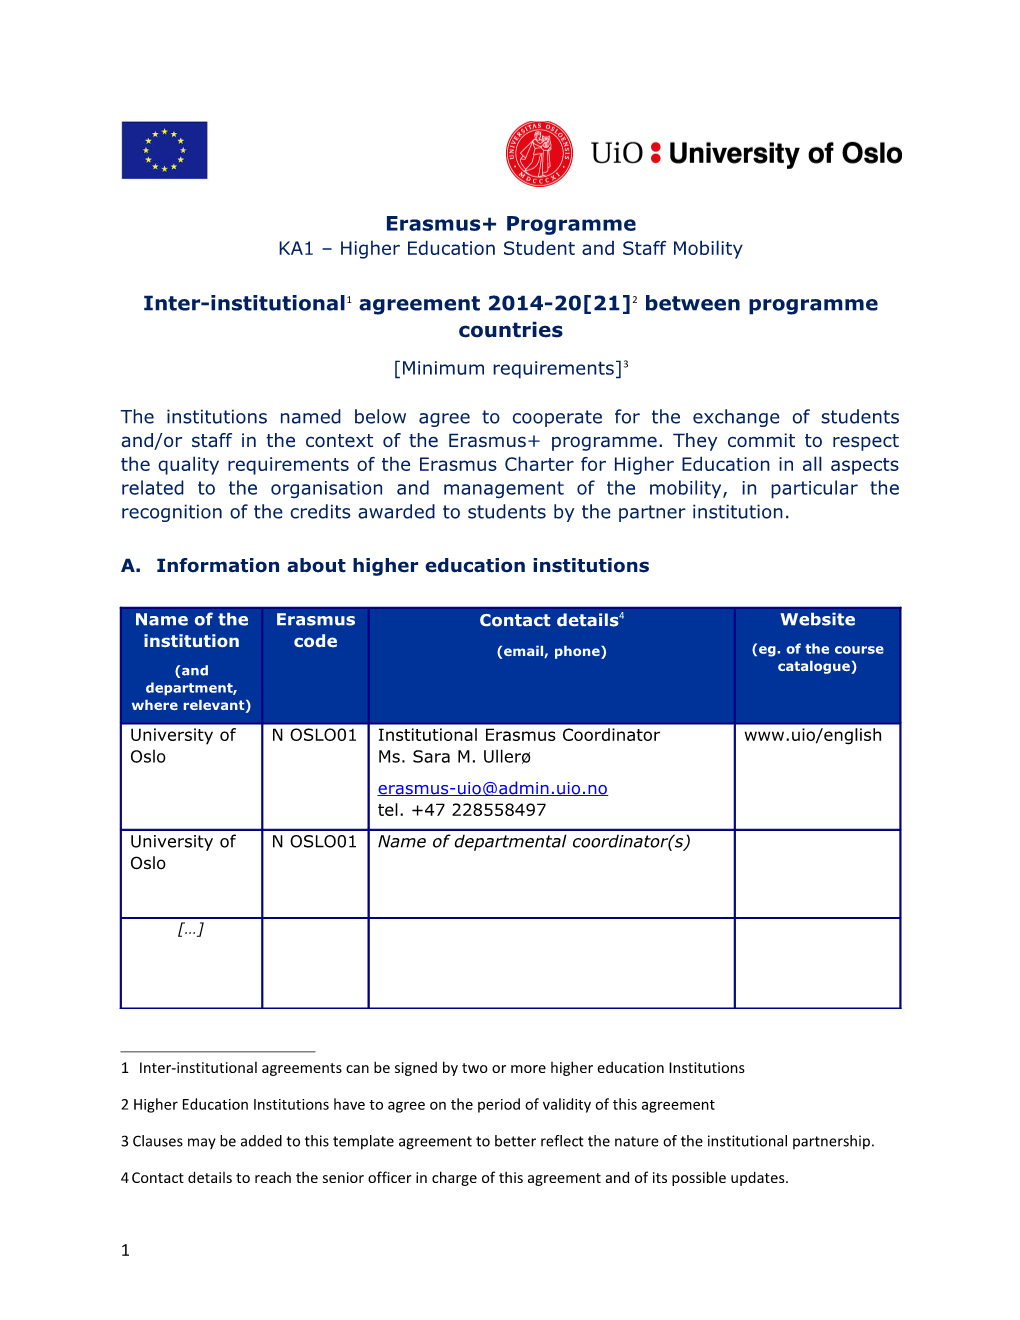 Inter-Institutional 1 Agreement 2014-20 21 2 Between Programme Countries